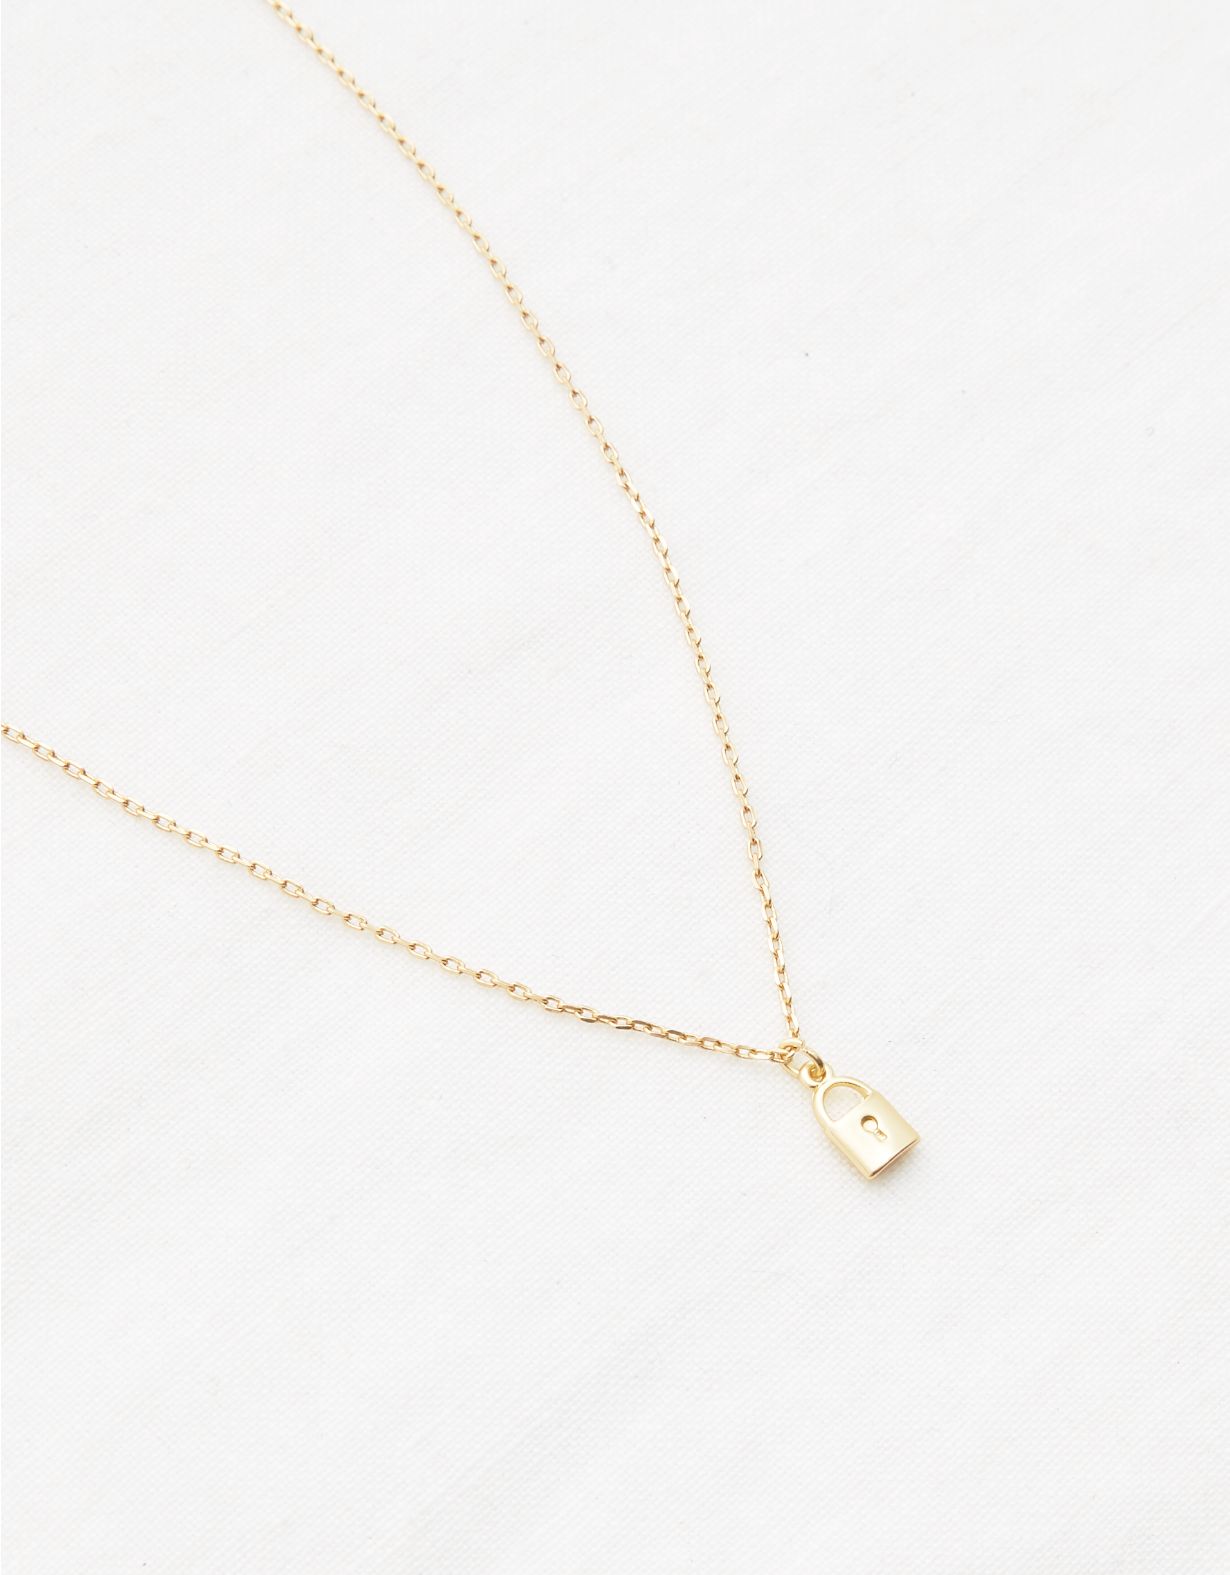 Aerie Charm Necklace